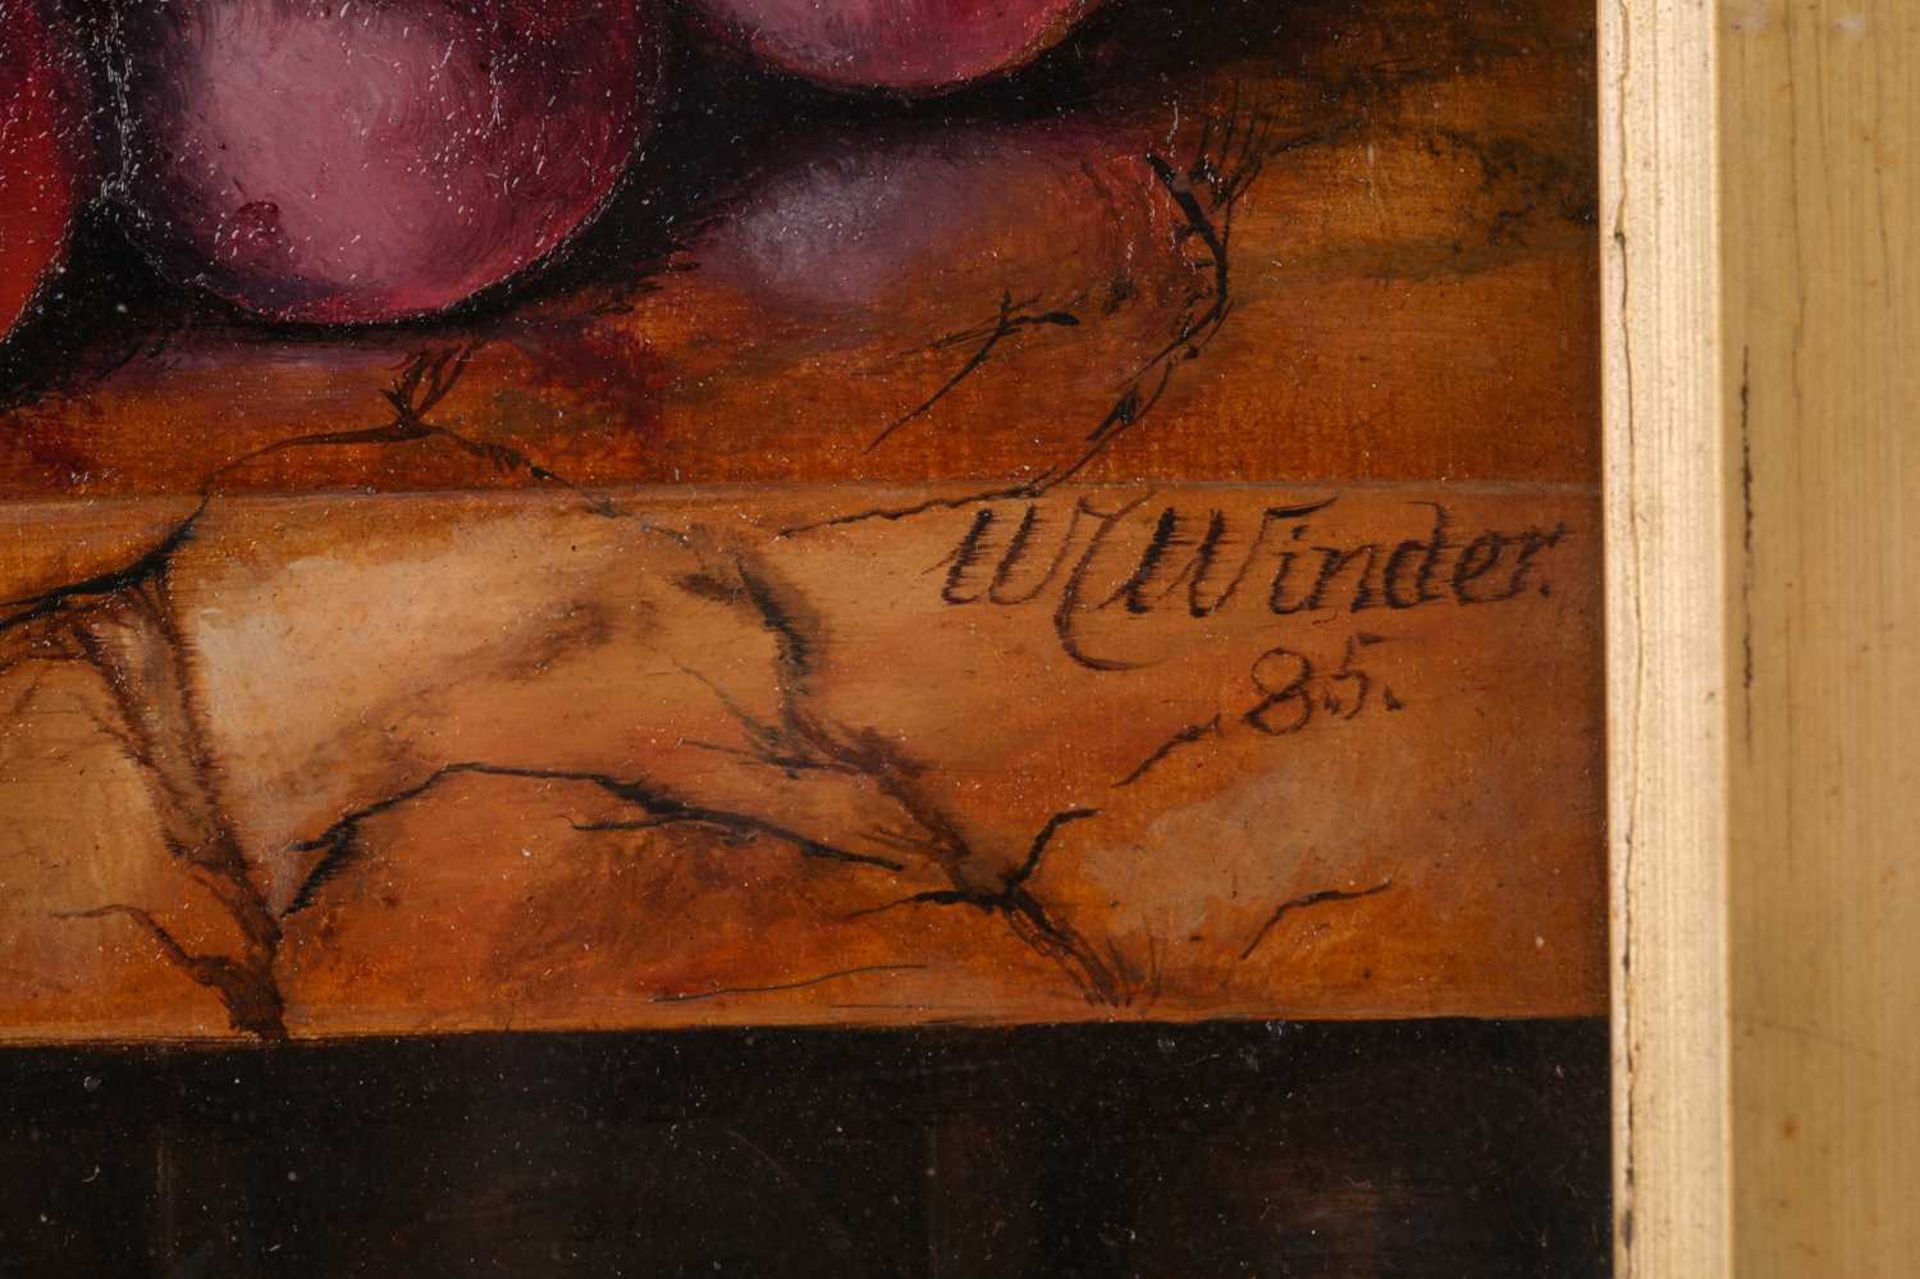 W. Winder (19th century), still life of grapes on marble, signed and dated '85, oil on panel, 17 x - Image 3 of 7